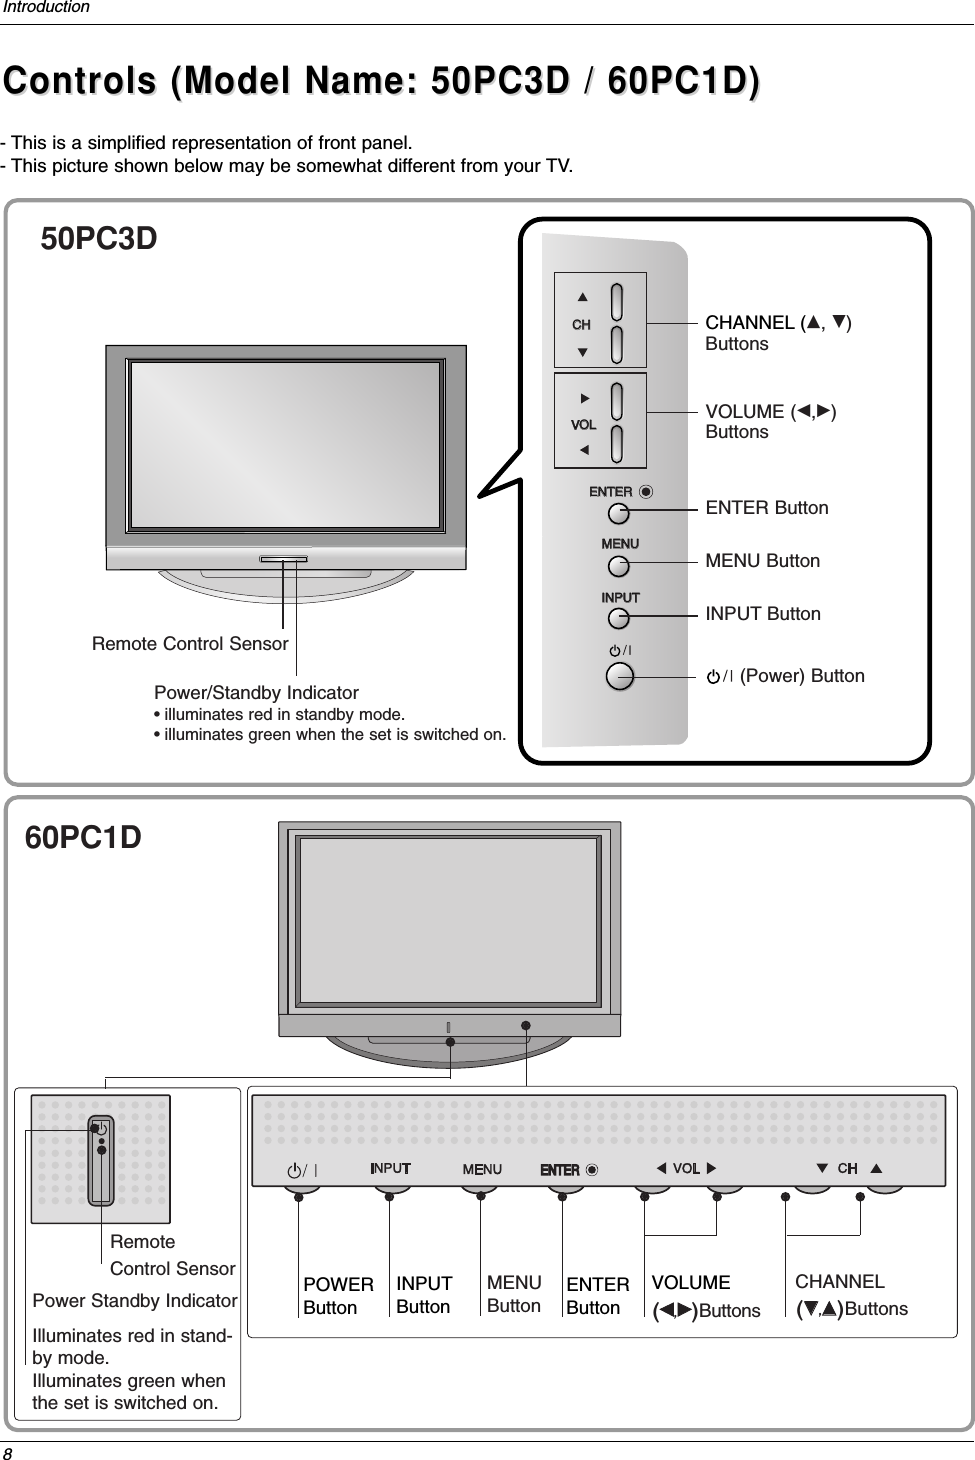 ENTER8IntroductionControls (Model Name: 50PC3D / 60PC1D)Controls (Model Name: 50PC3D / 60PC1D)- This is a simplified representation of front panel. - This picture shown below may be somewhat different from your TV.POWERButtonINPUTButtonENTERButtonVOLUME(FF,GG)ButtonsCHANNEL(EE,DD)ButtonsPower Standby IndicatorIlluminates red in stand-by mode.Illuminates green whenthe set is switched on.MENUButton      ENTERENTERRemote Control SensorCHCHVOLOLENTERENTERMENUMENUINPUTINPUTCHANNEL (D, E)ButtonsVOLUME (F,G)ButtonsENTER ButtonMENU ButtonINPUT ButtonRemote Control SensorPower/Standby Indicator• illuminates red in standby mode.• illuminates green when the set is switched on.(Power) Button50PC3D60PC1D